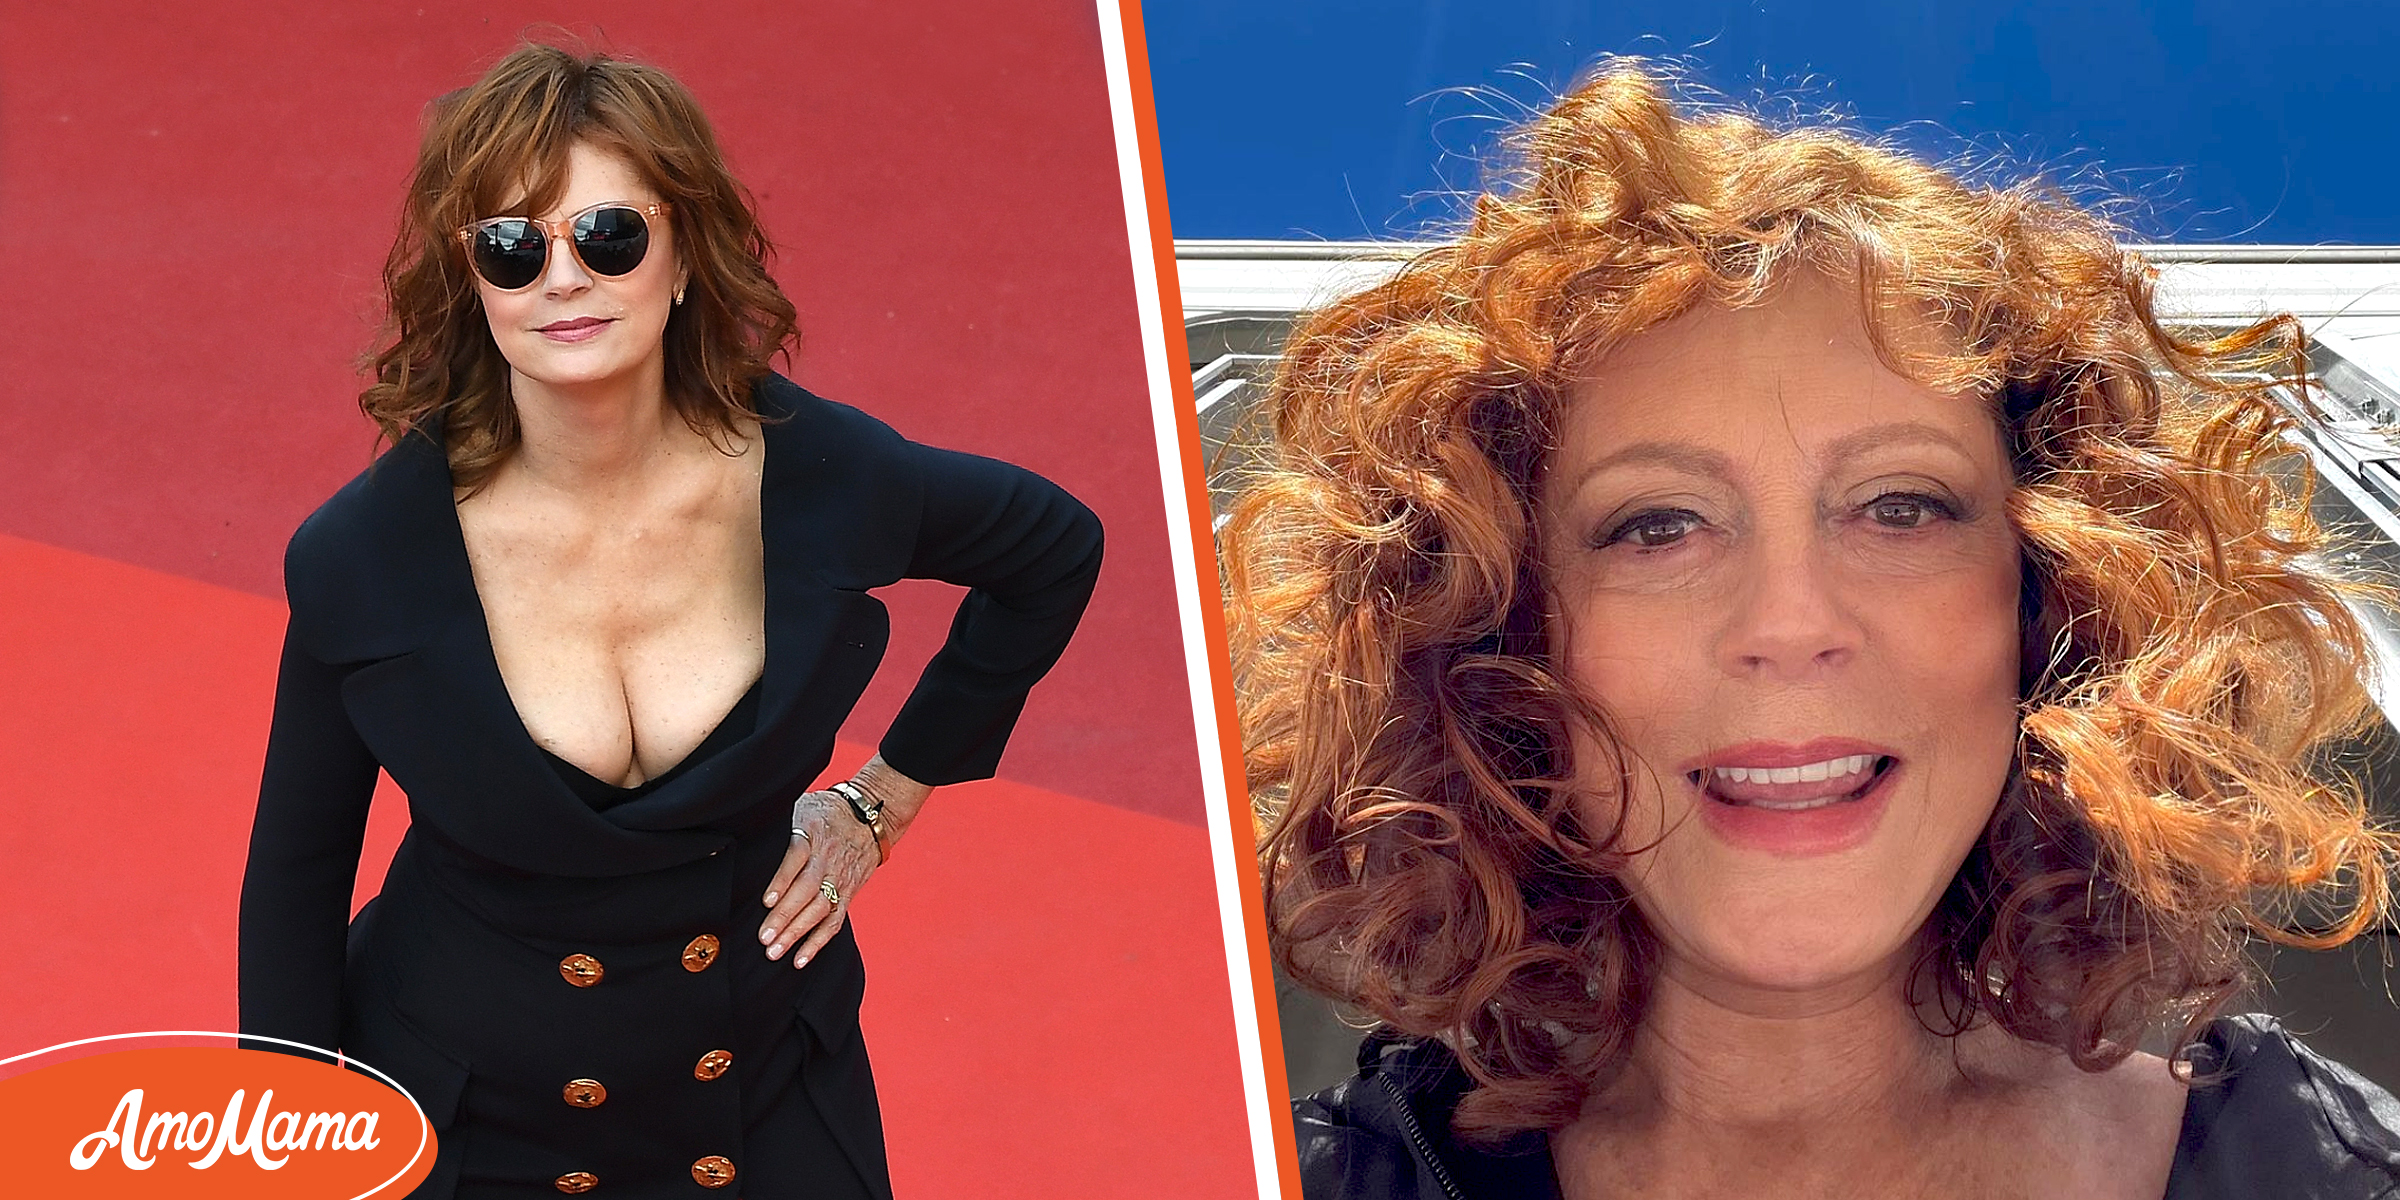 Susan Sarandon Slammed for 'Inappropriate' Fit In Her 70s - She Defies Critics, Showing Her Cleavage & Fit Body